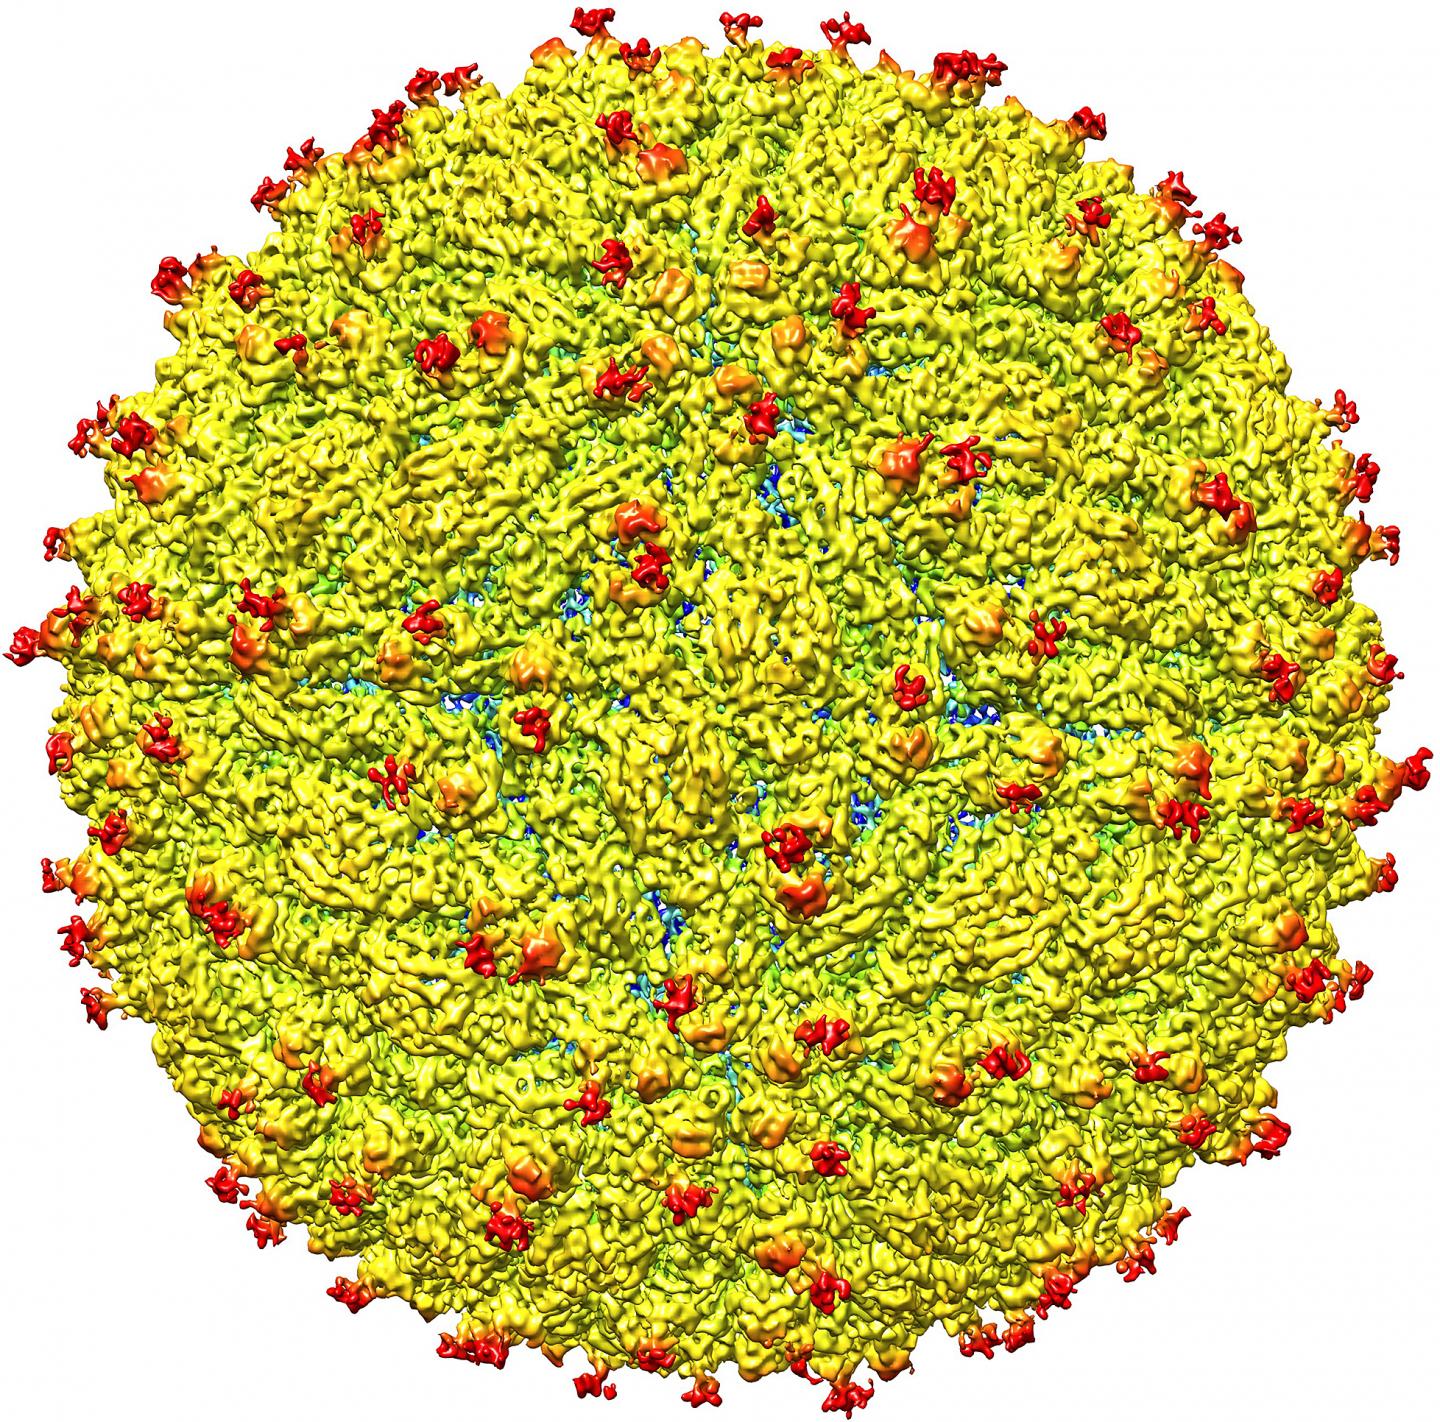 Representation of the Surface of the Zika Virus